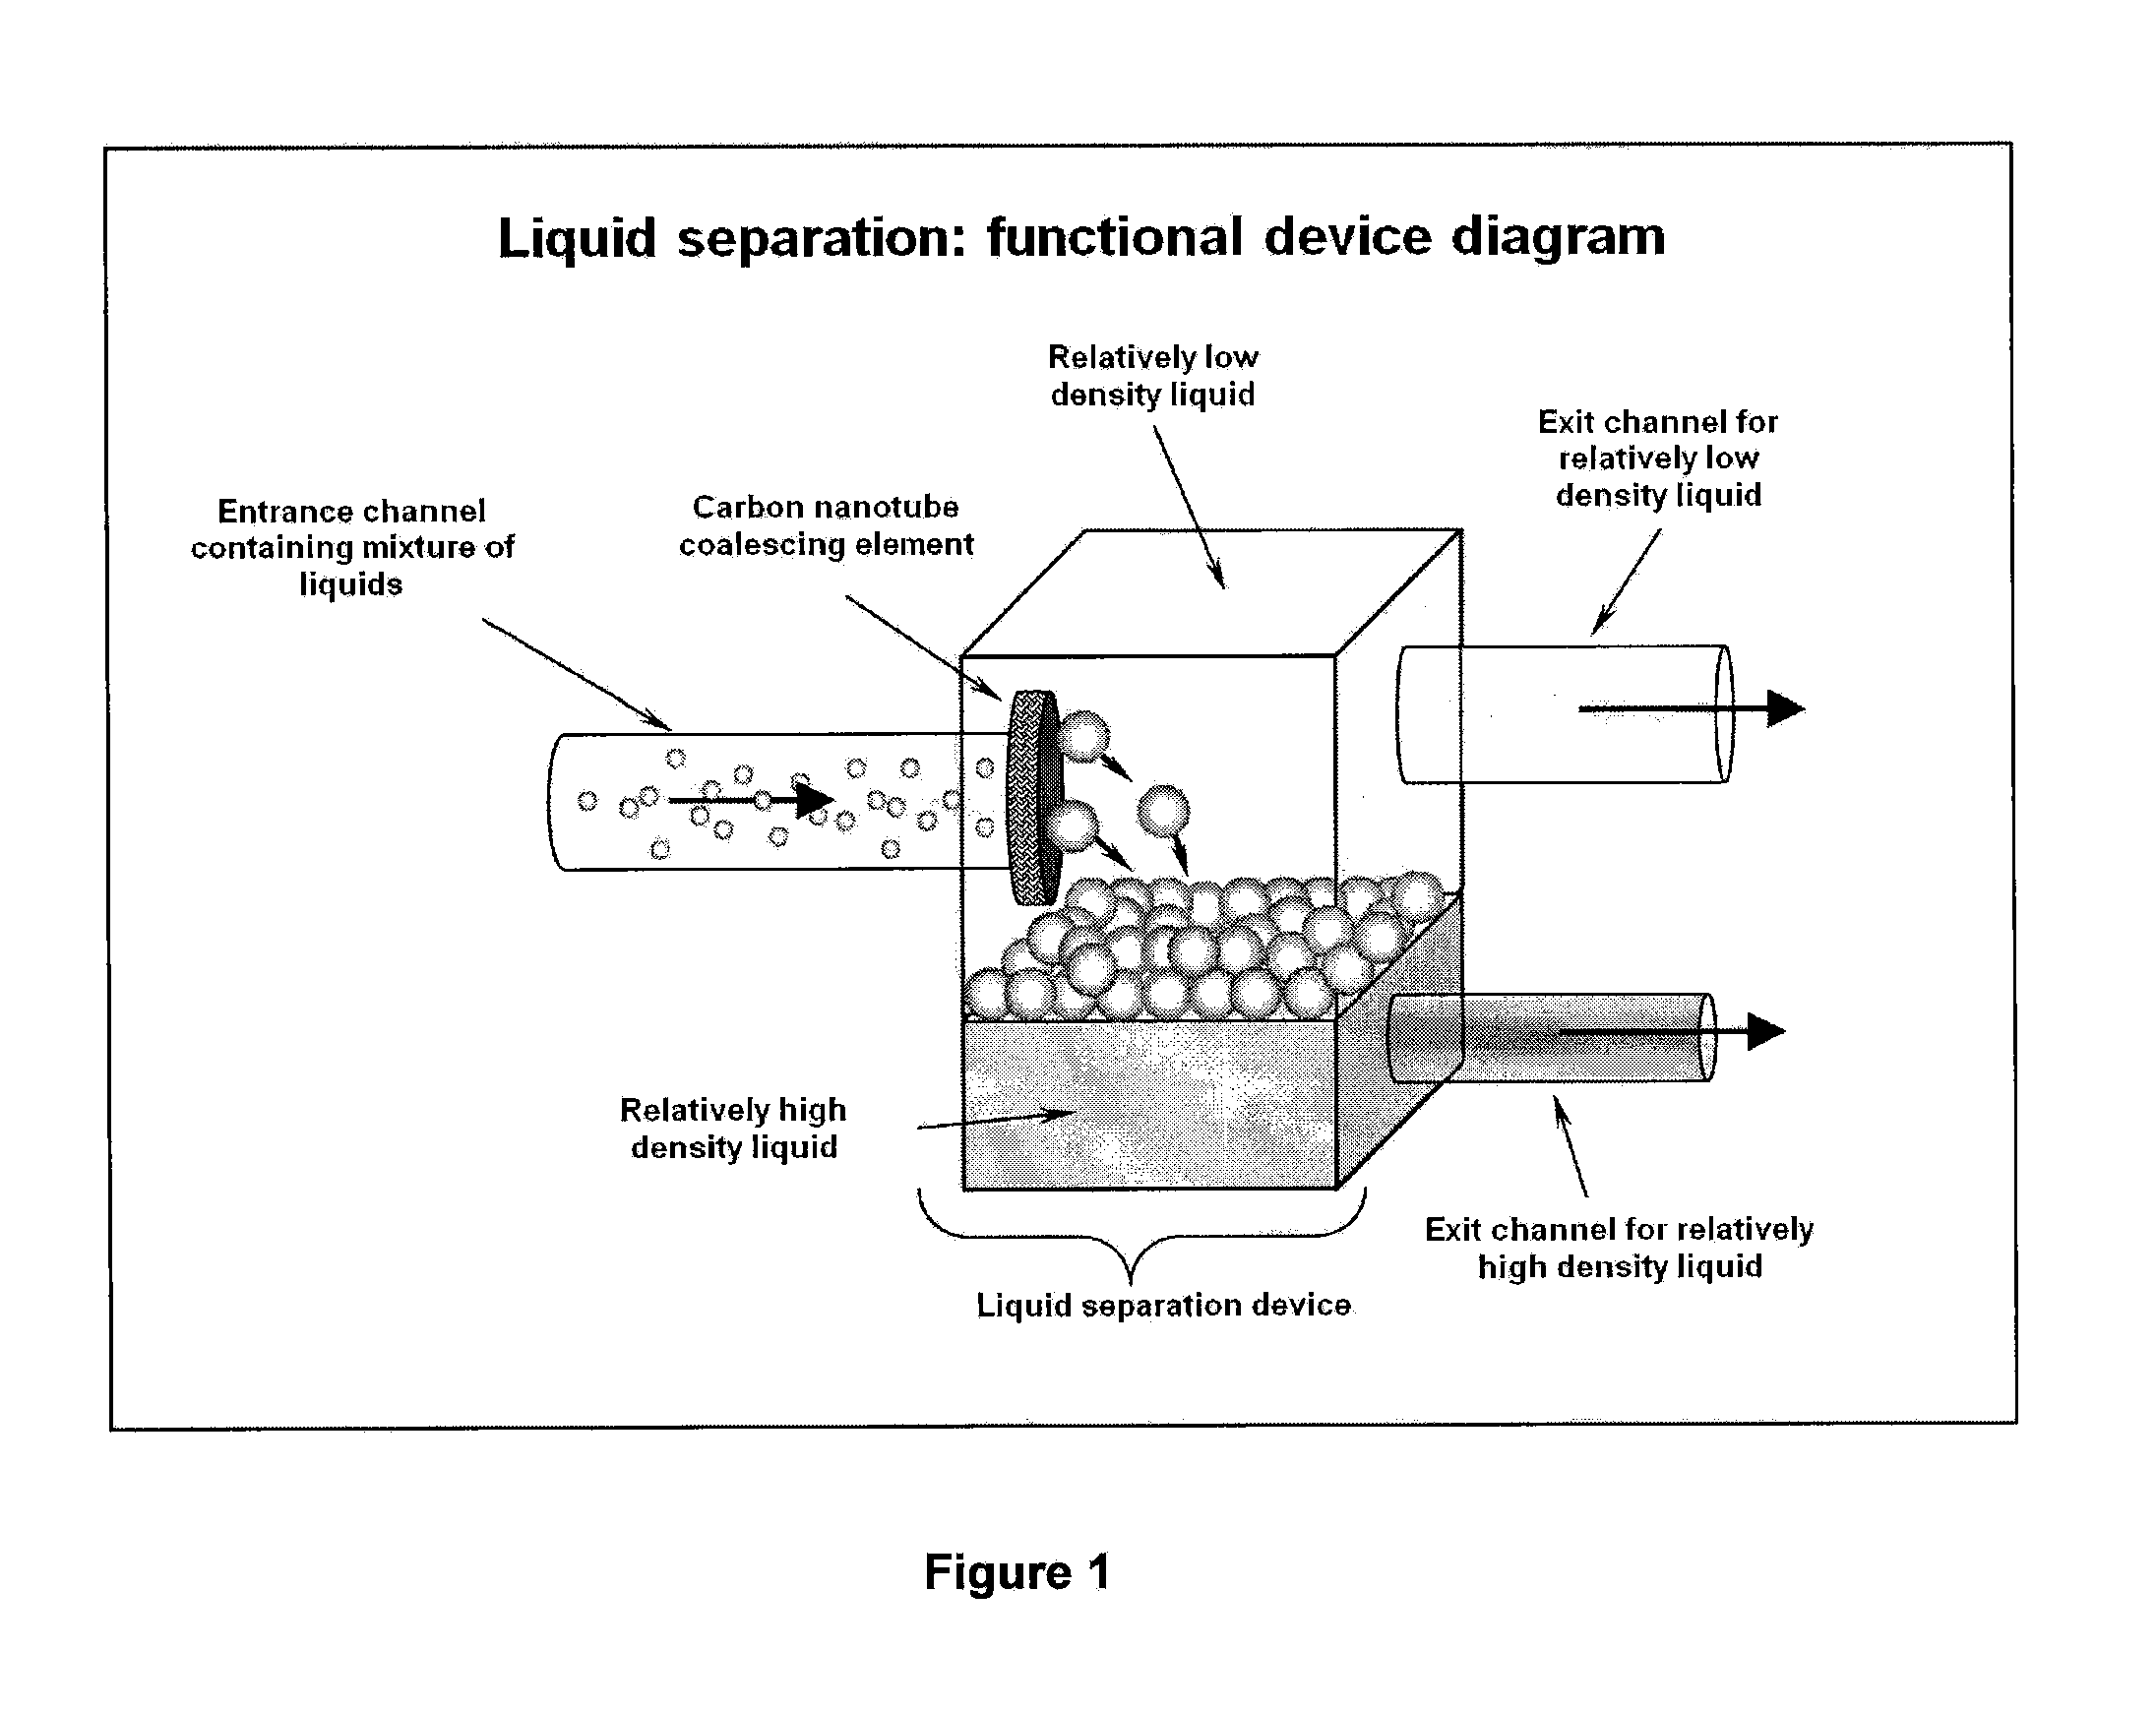 Carbon nanotube material and method for the separation of liquids